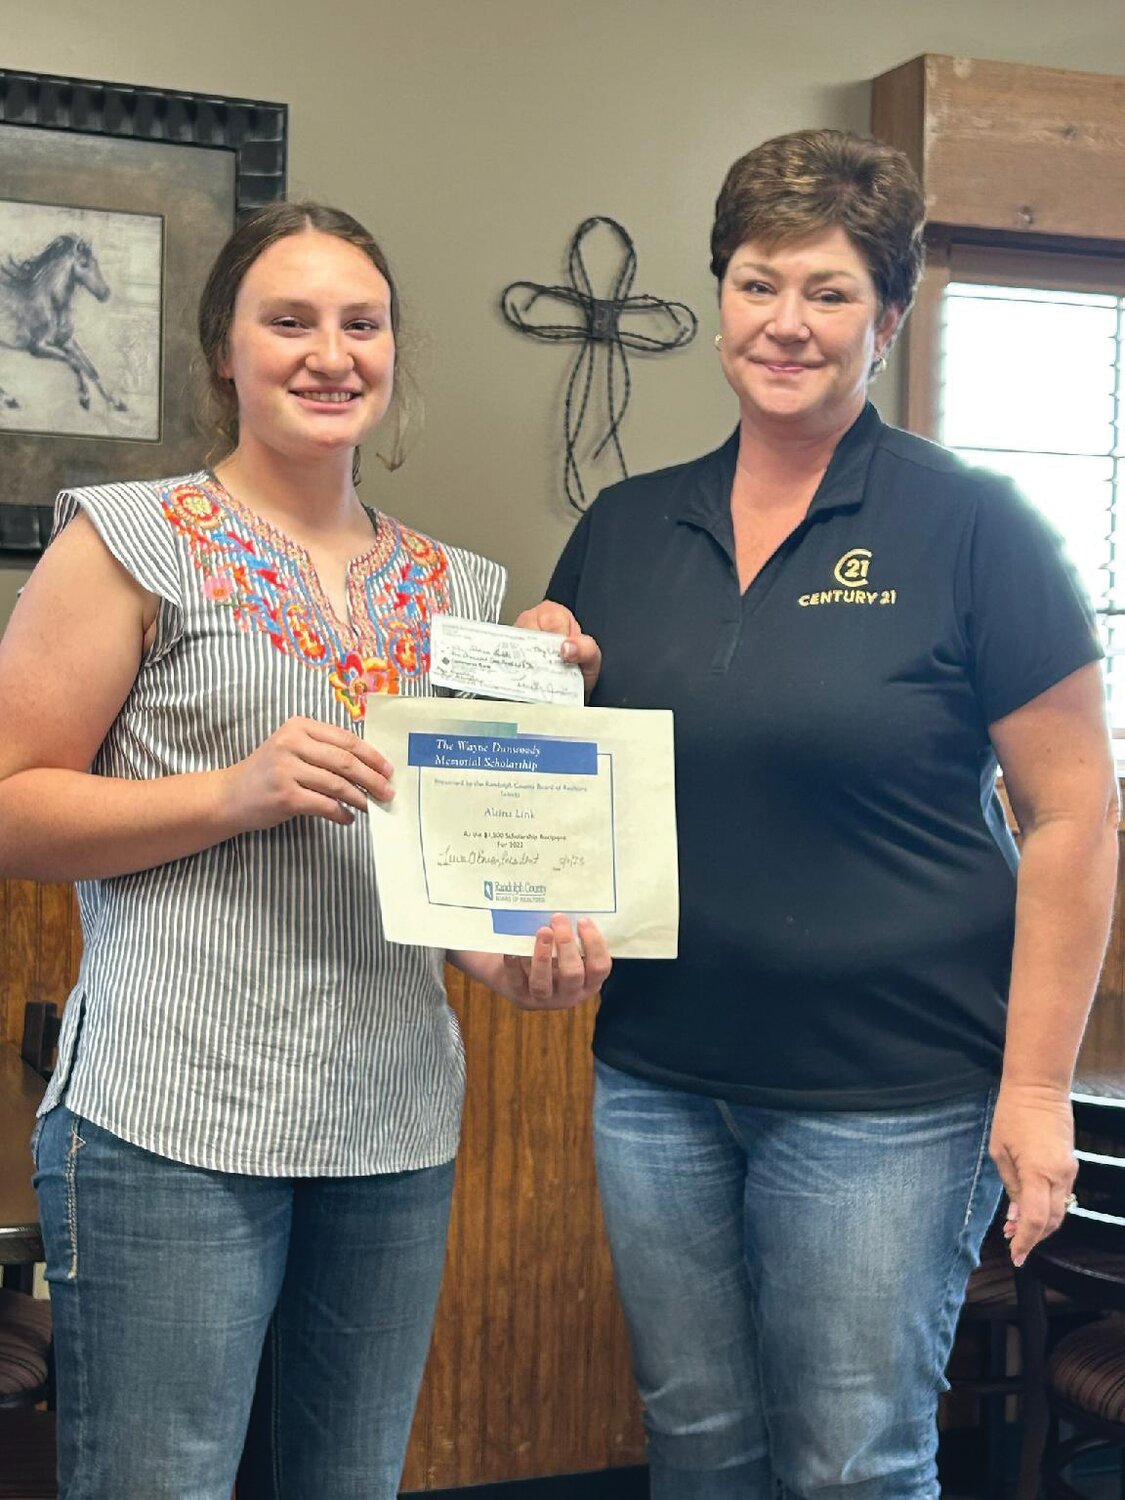 Alaina Link, left, a current student at the University of Missouri, received a $1,500 scholarship to further her studies in an agricultural field. Also pictured is Julie Green, president of the Randolph County Board of Realtors.